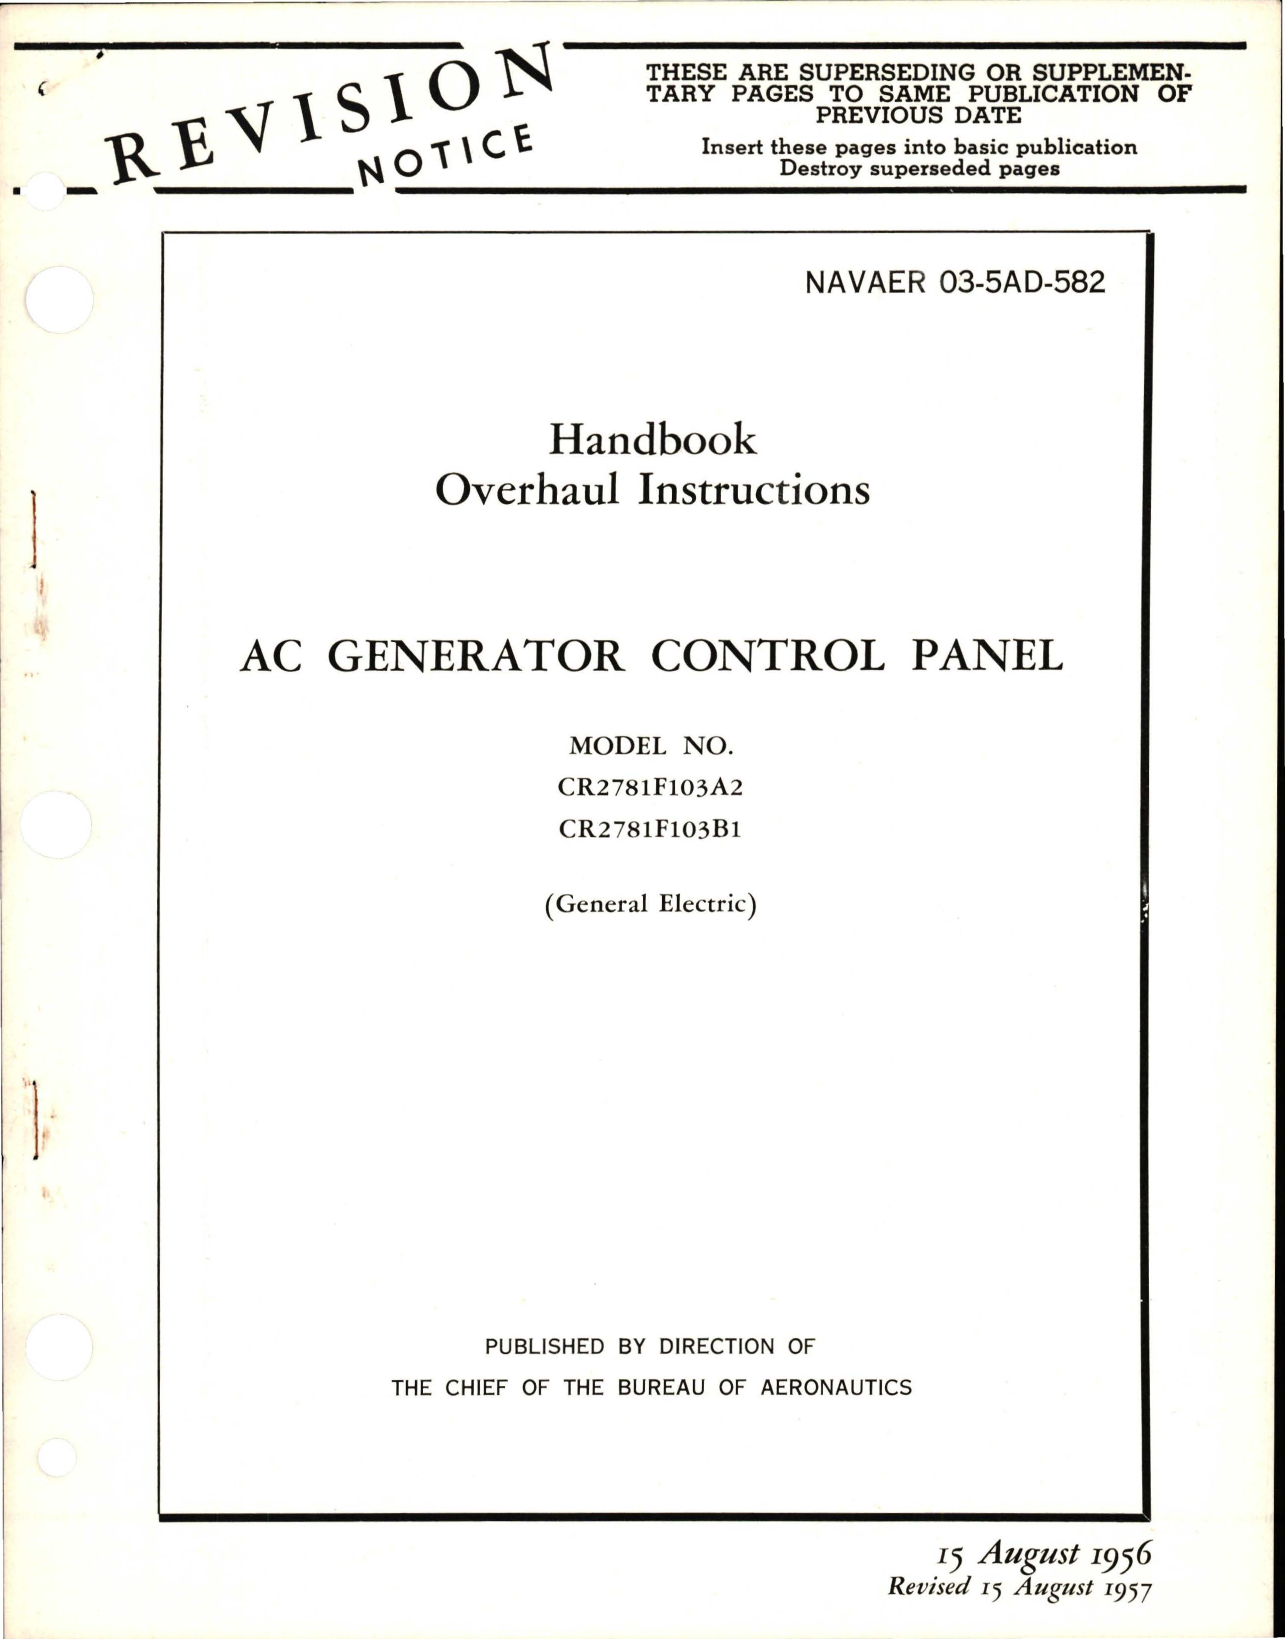 Sample page 1 from AirCorps Library document: Overhaul Instructions for AC Generator Control Panel - Models CR2781F103A2 and CR2781F103B1